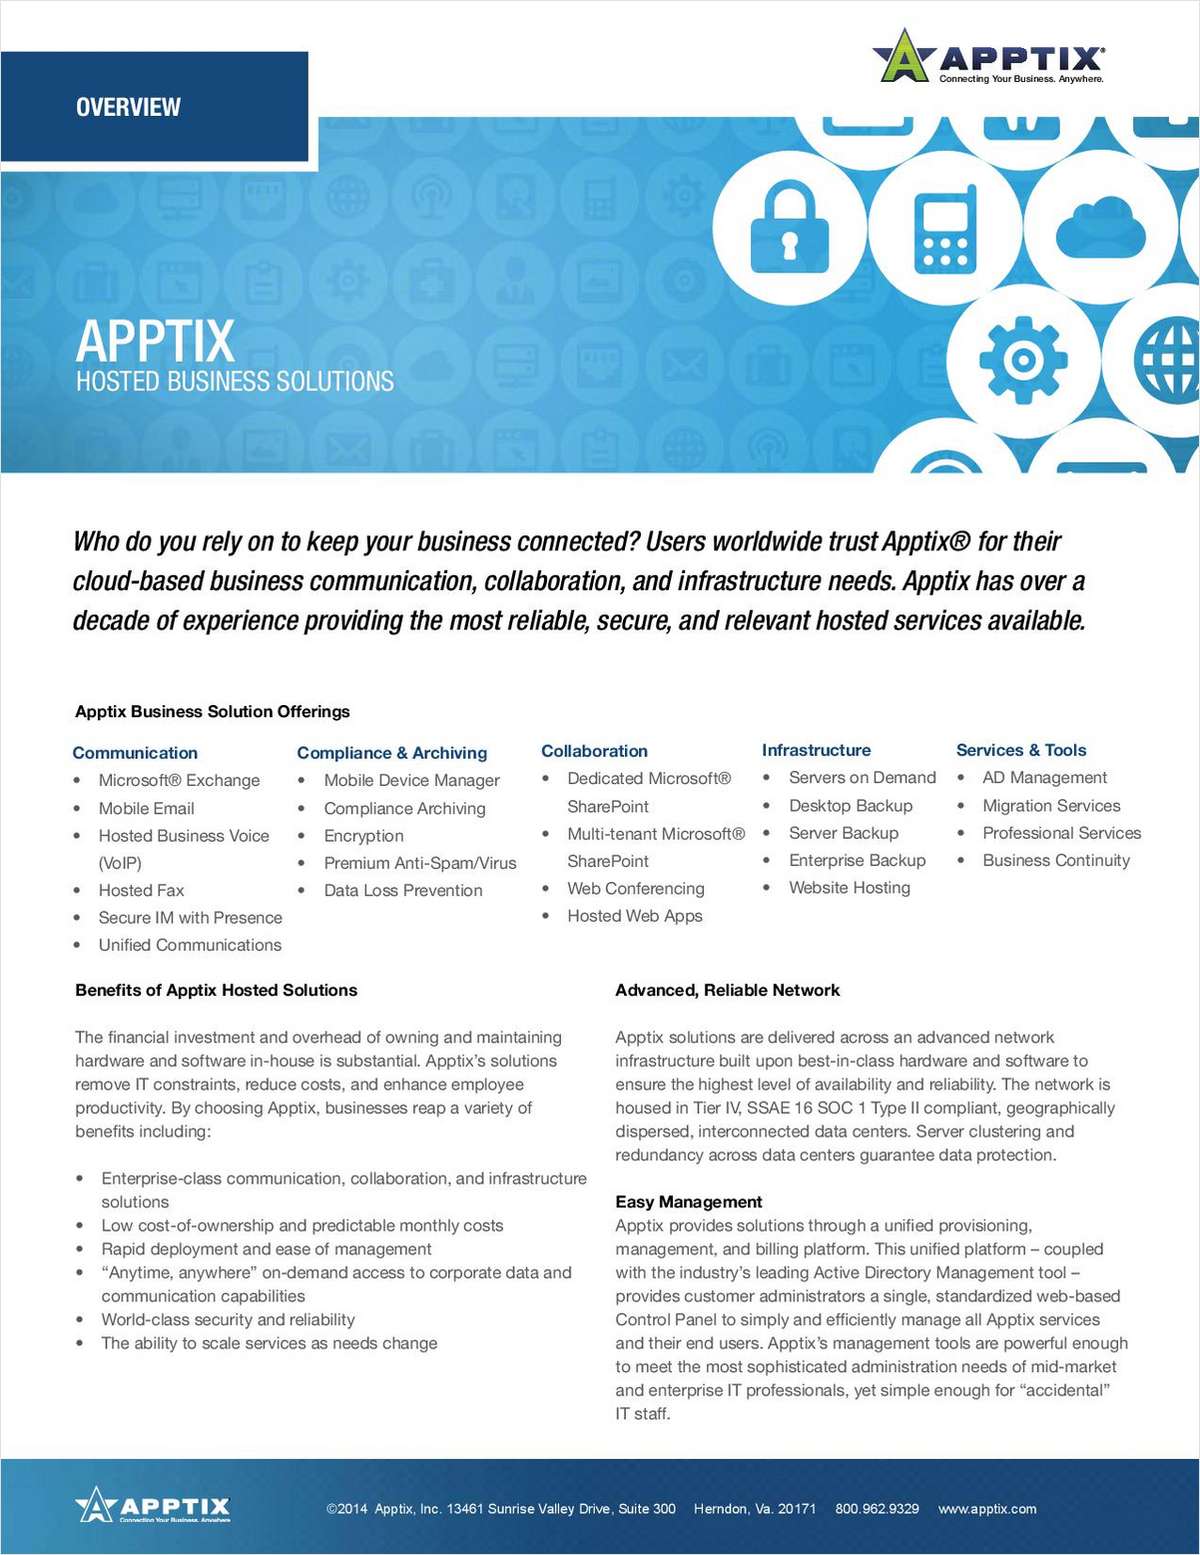 Apptix - Hosted Business Solutions